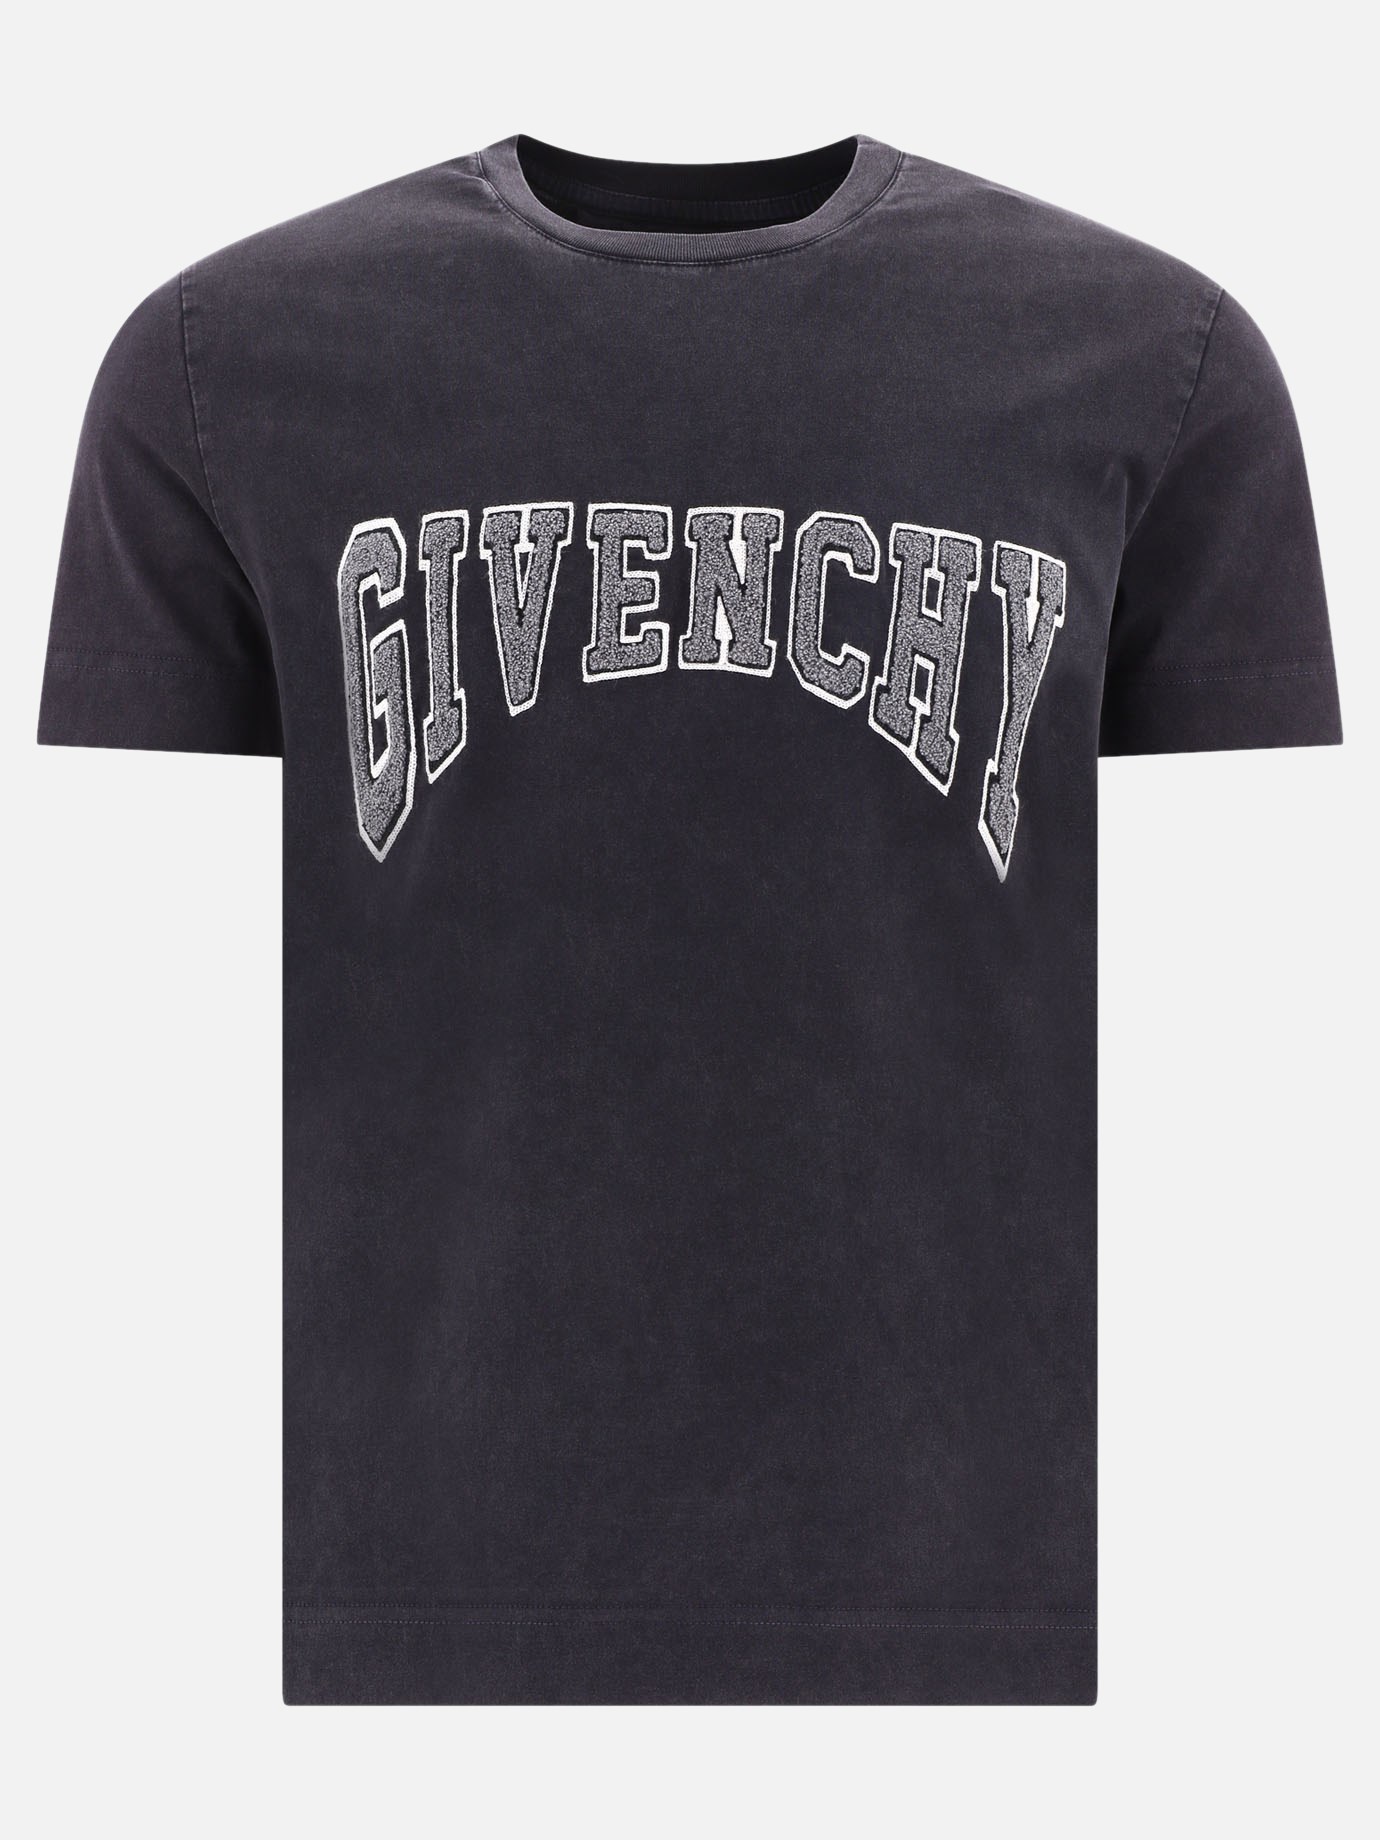  College  t-shirtby Givenchy - 4